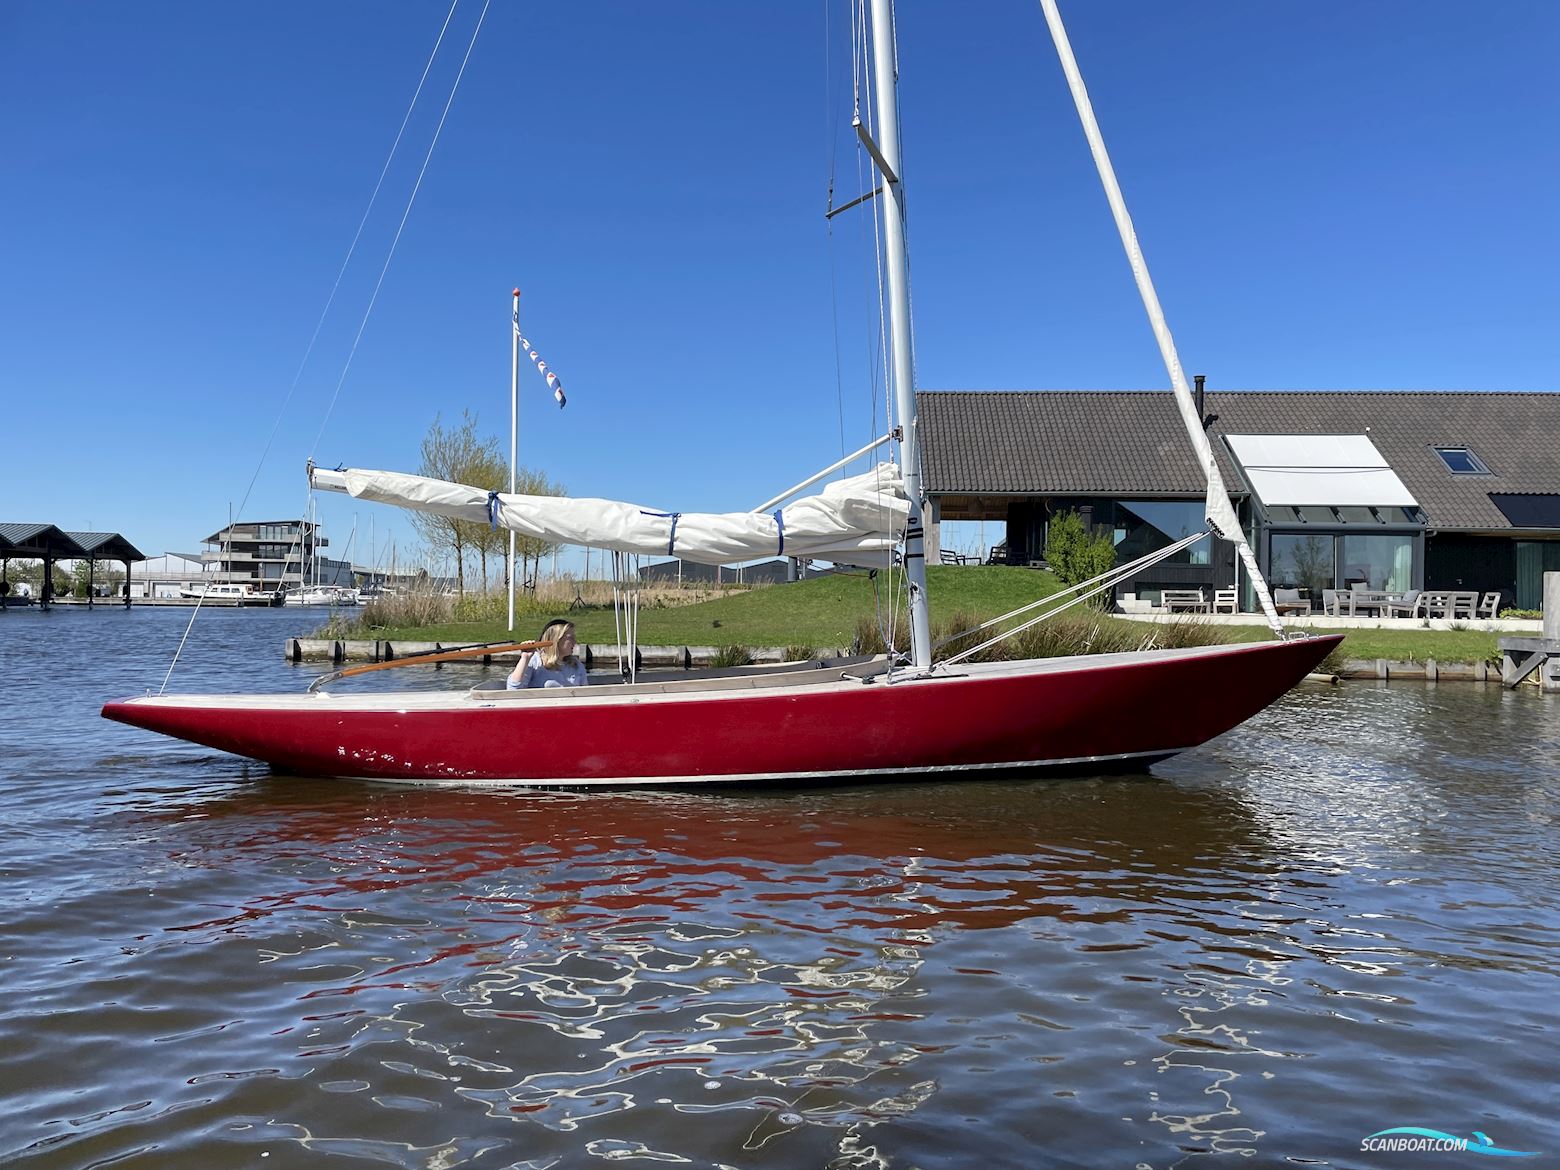 Rustler 24 Sailing boat 2011, with Nanni Diesel engine, The Netherlands